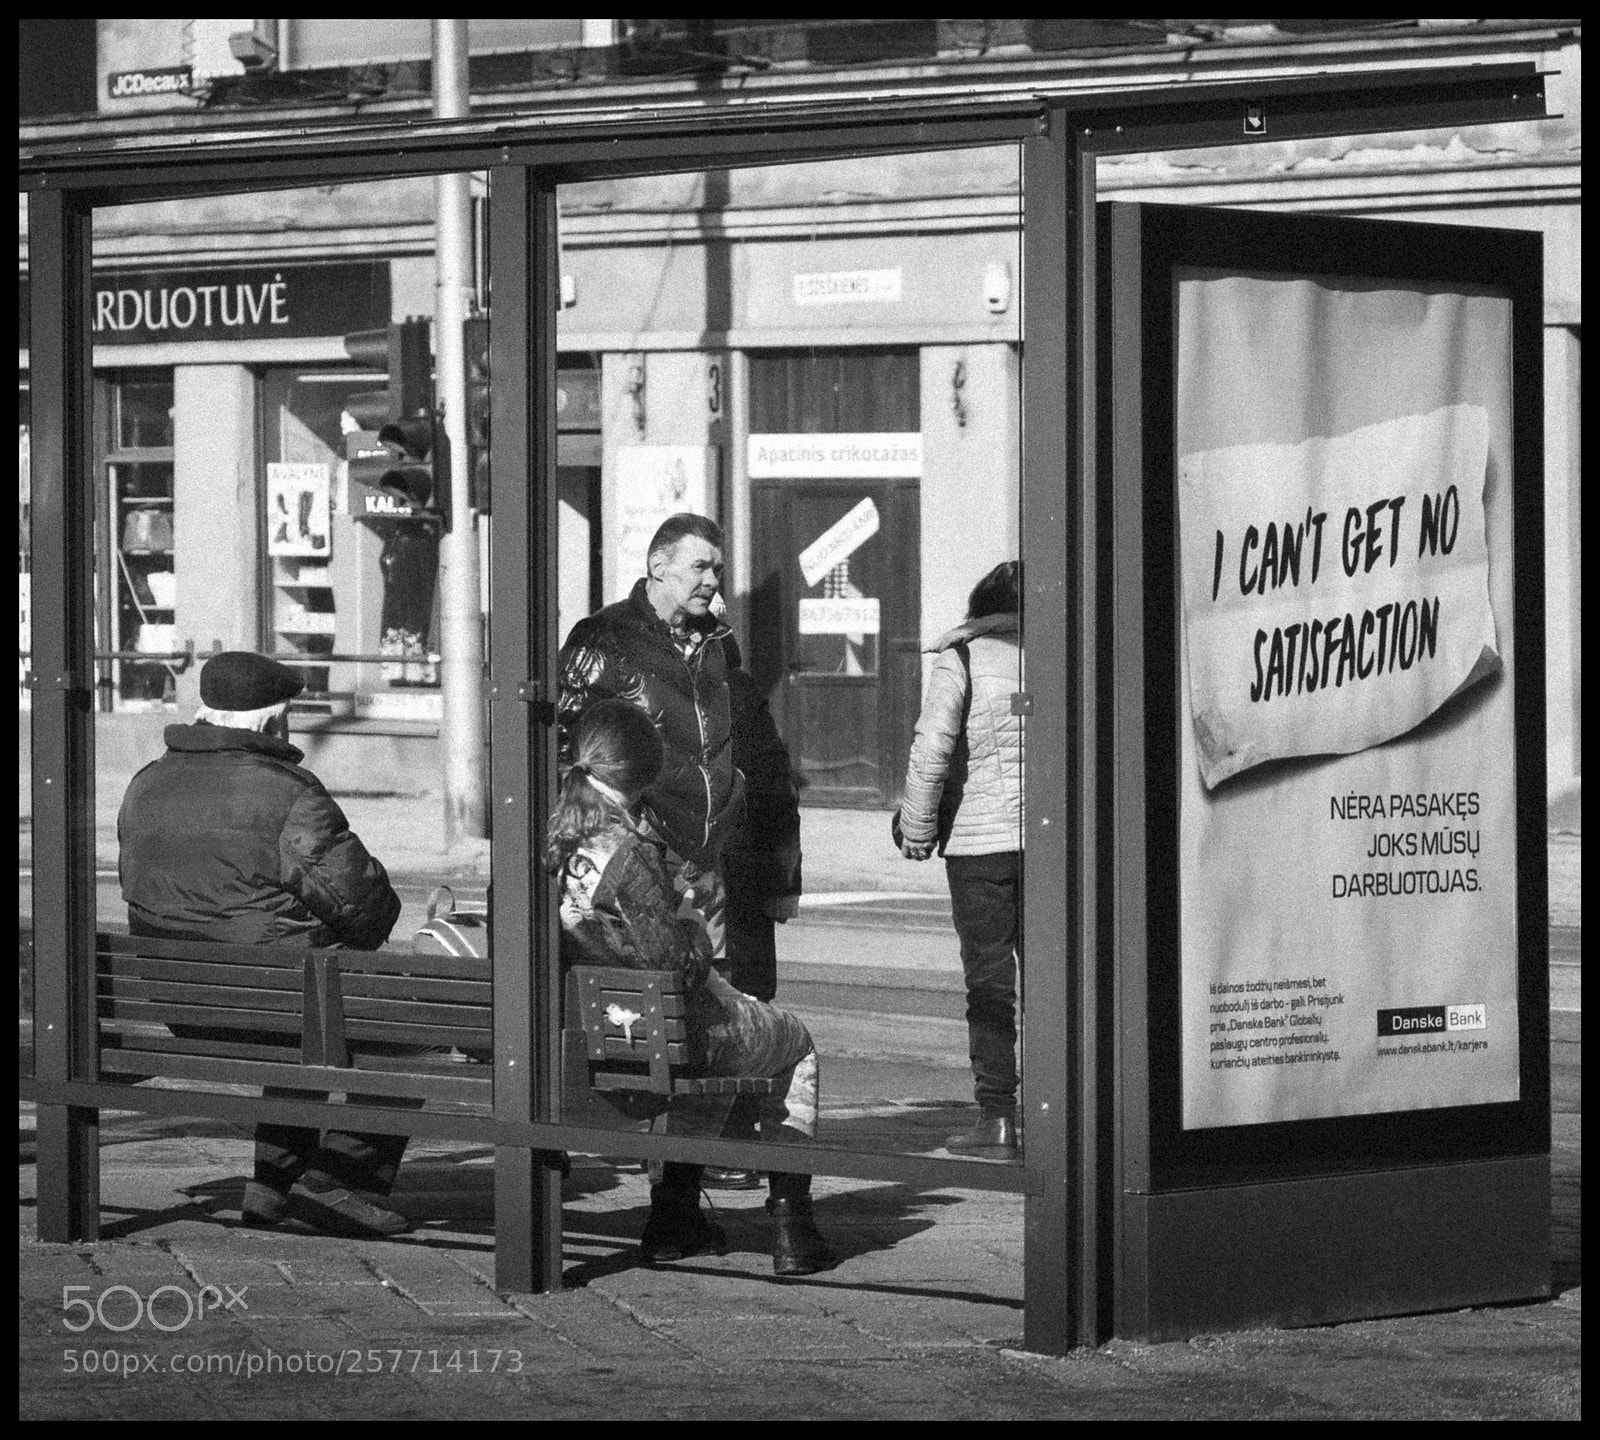 Sony a99 II sample photo. Bus stop philosopher photography